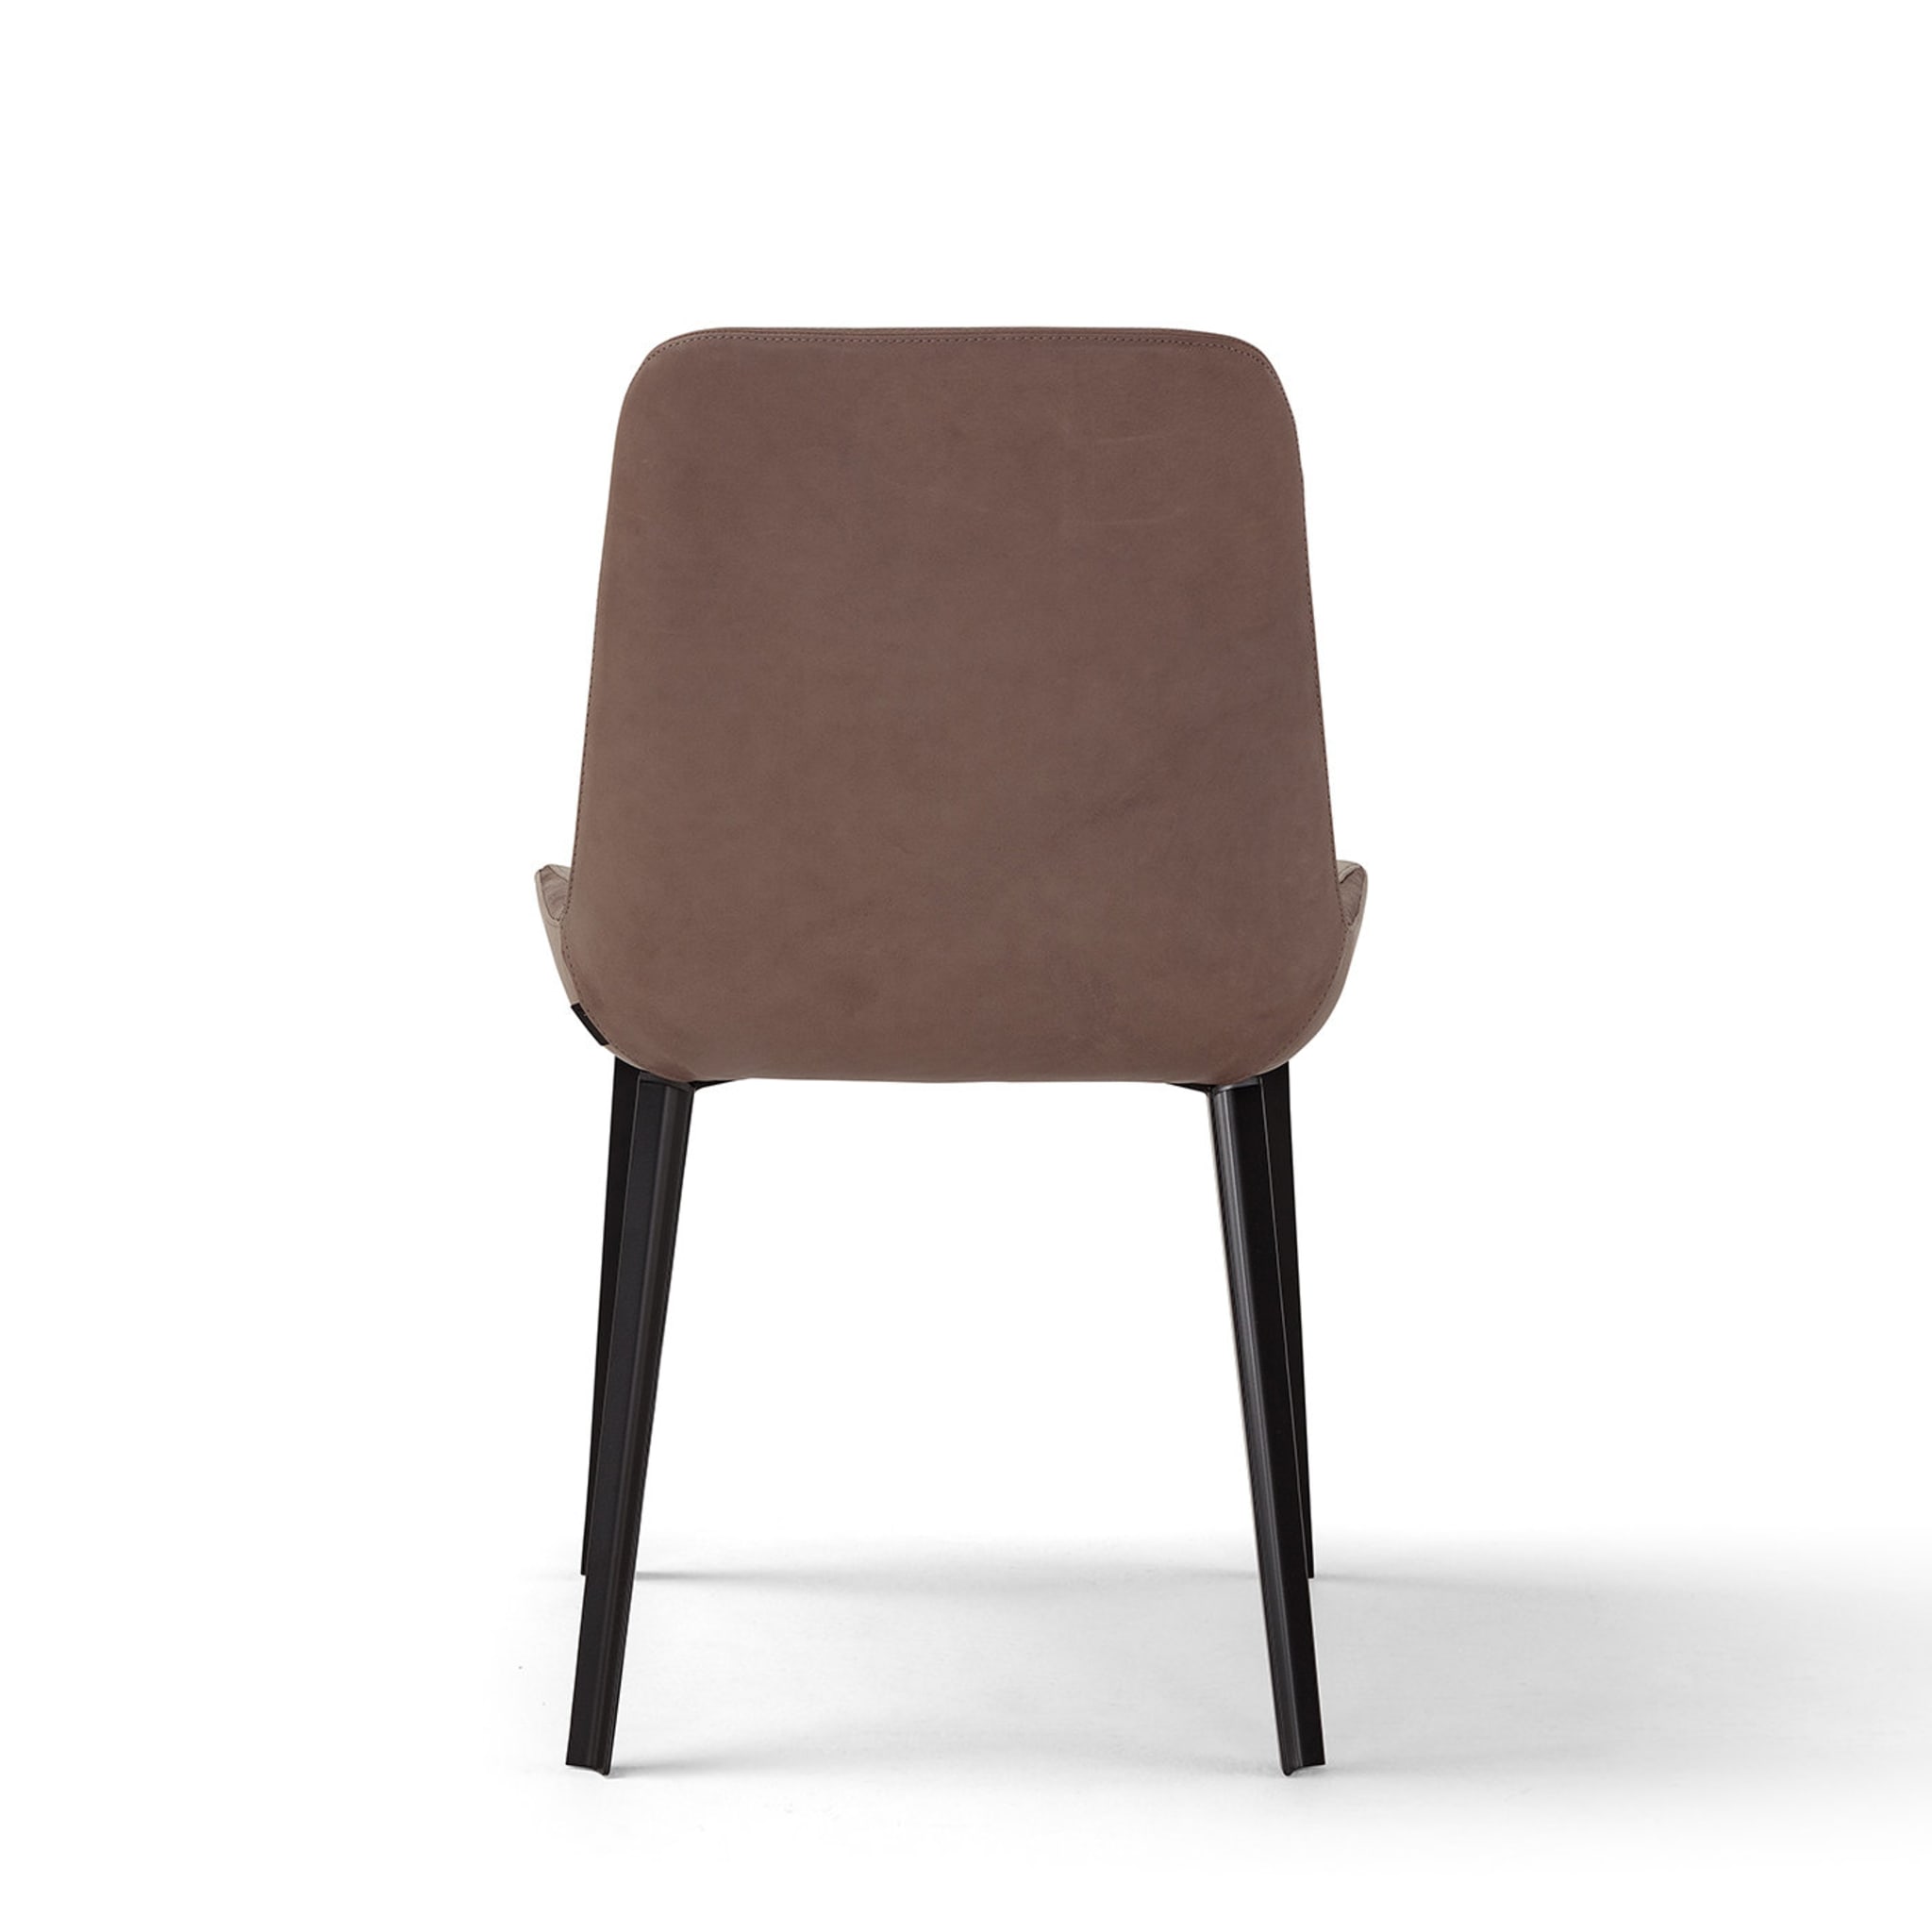 Panis Leather Chair by Anton Cristell and Emanuel Gargano - Alternative view 3